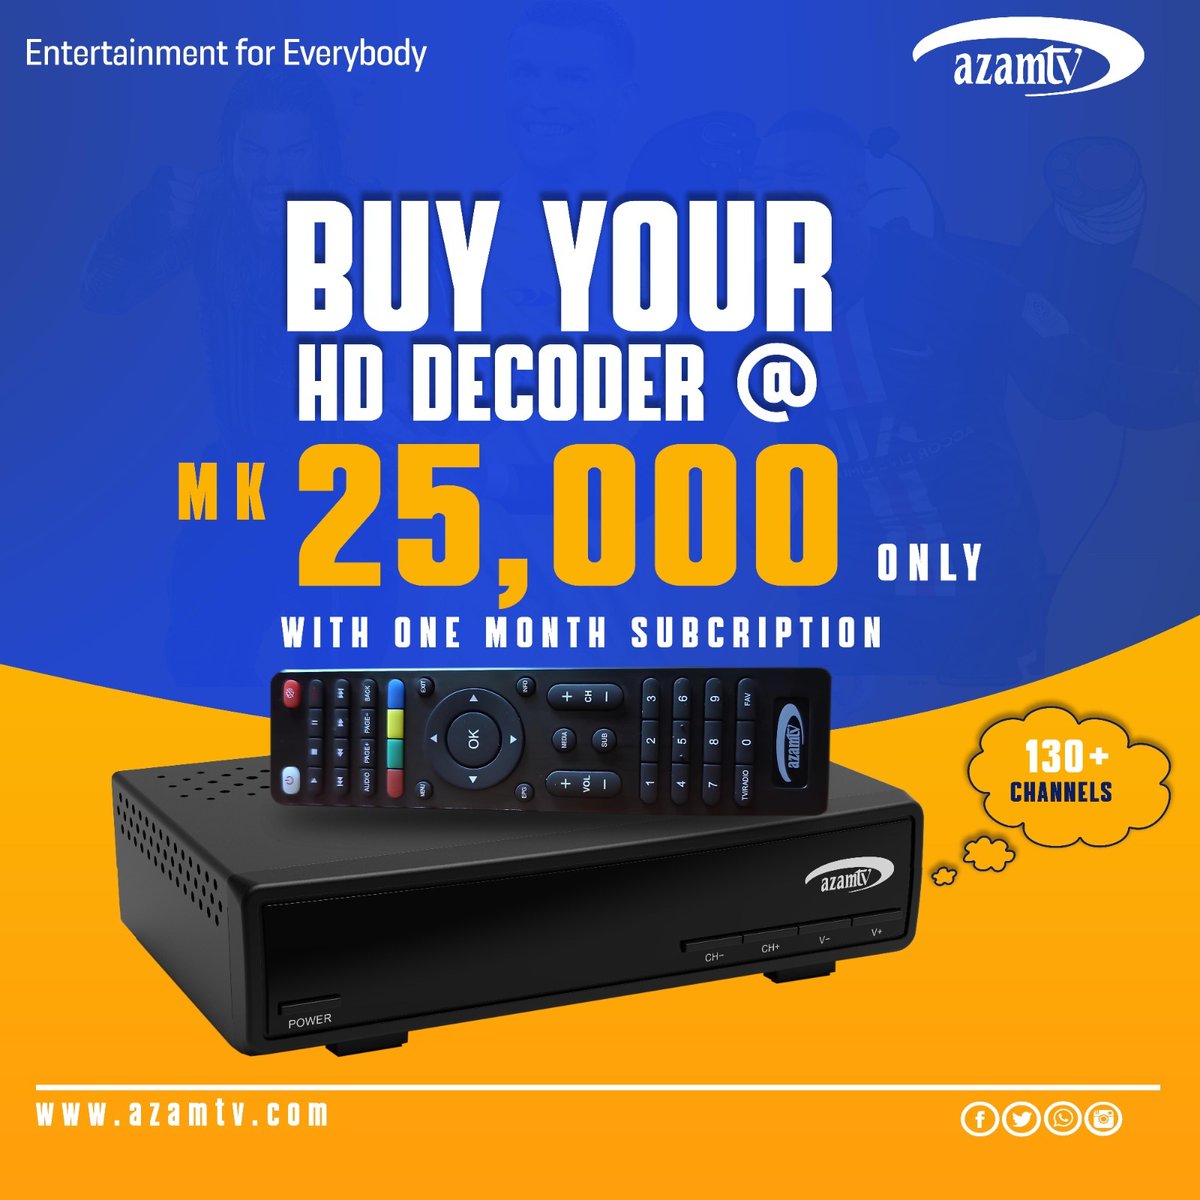 Dear Valued Customer,

Get your new AzamTV Decoder at K25,000 and enjoy 1 month free of your favorite shows, news, Live Football matches, movies and many more content from the comfort of your own home.

#azamtvmalawi #entertainmentforeverybody